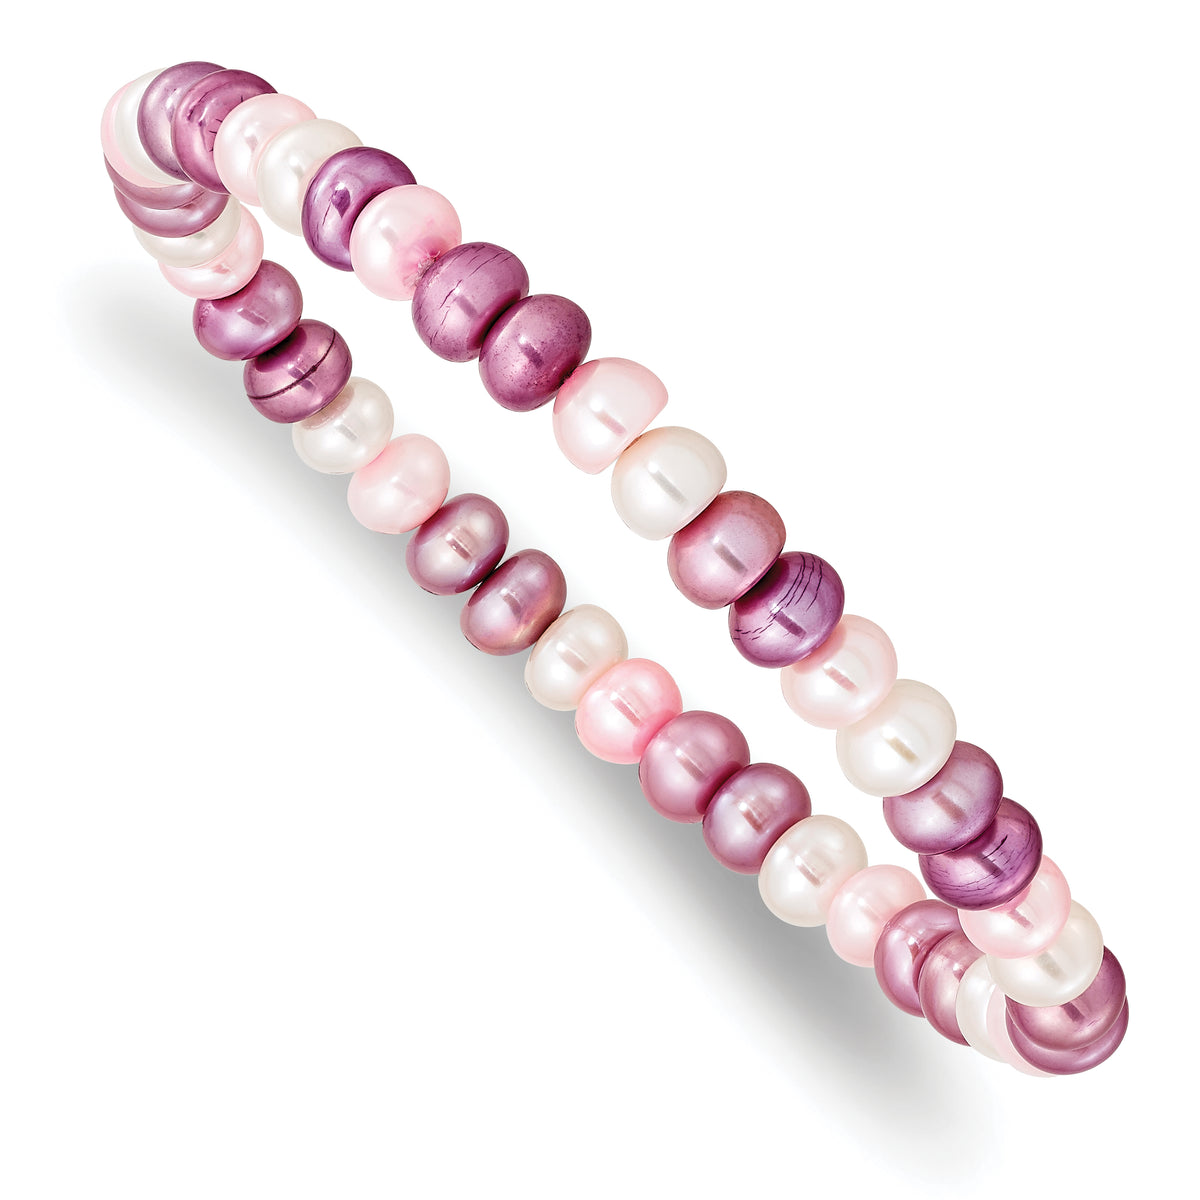 6-7mm White/Lavender/Pink Button Freshwater Cultured Pearl Stretch Bracele